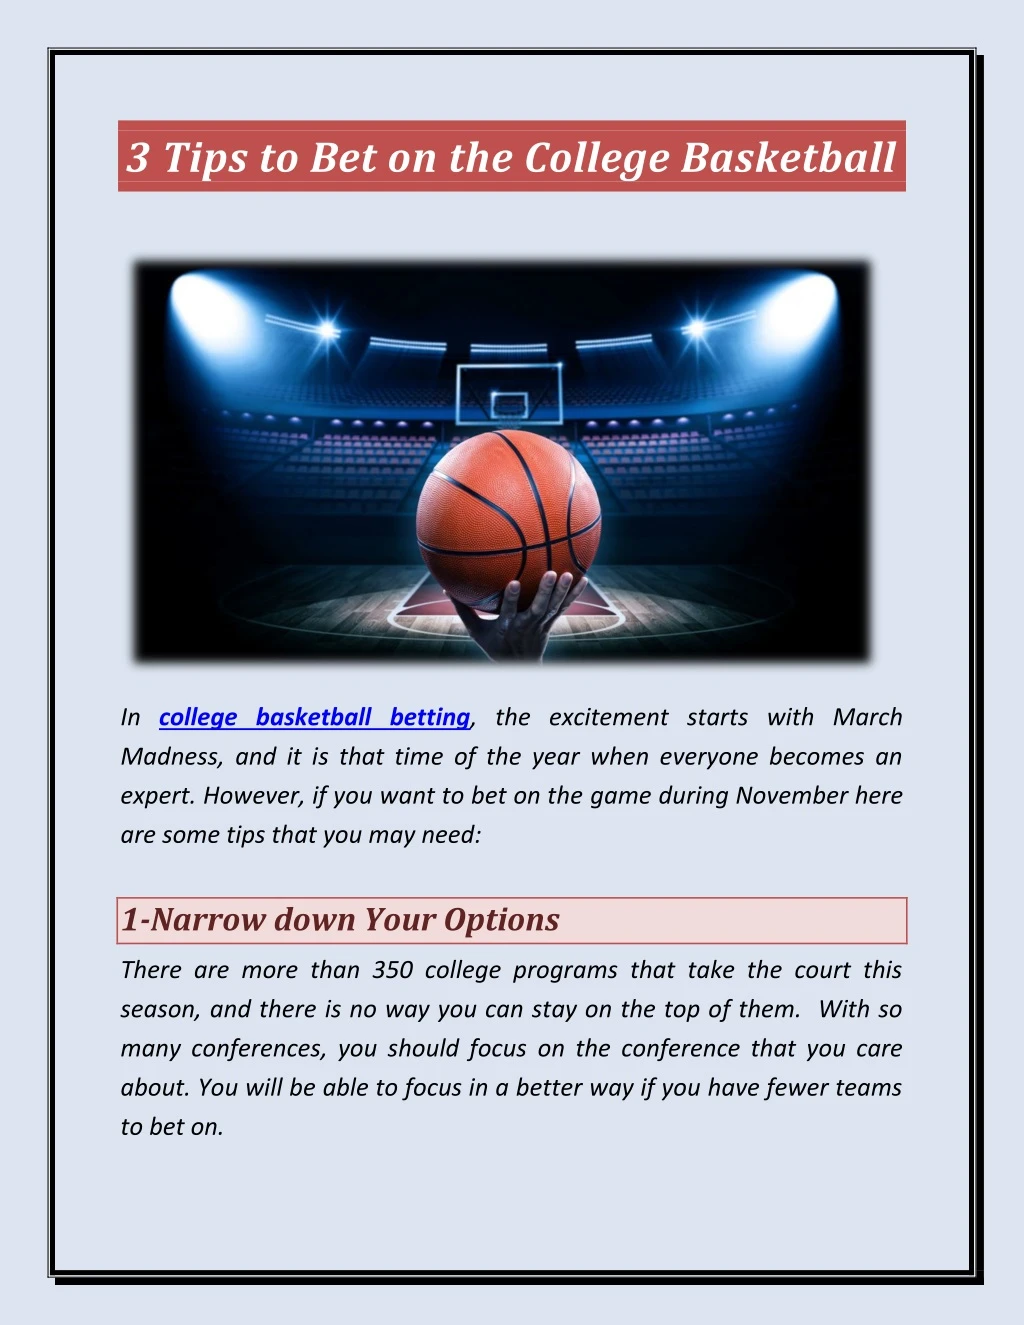 3 tips to bet on the college basketball